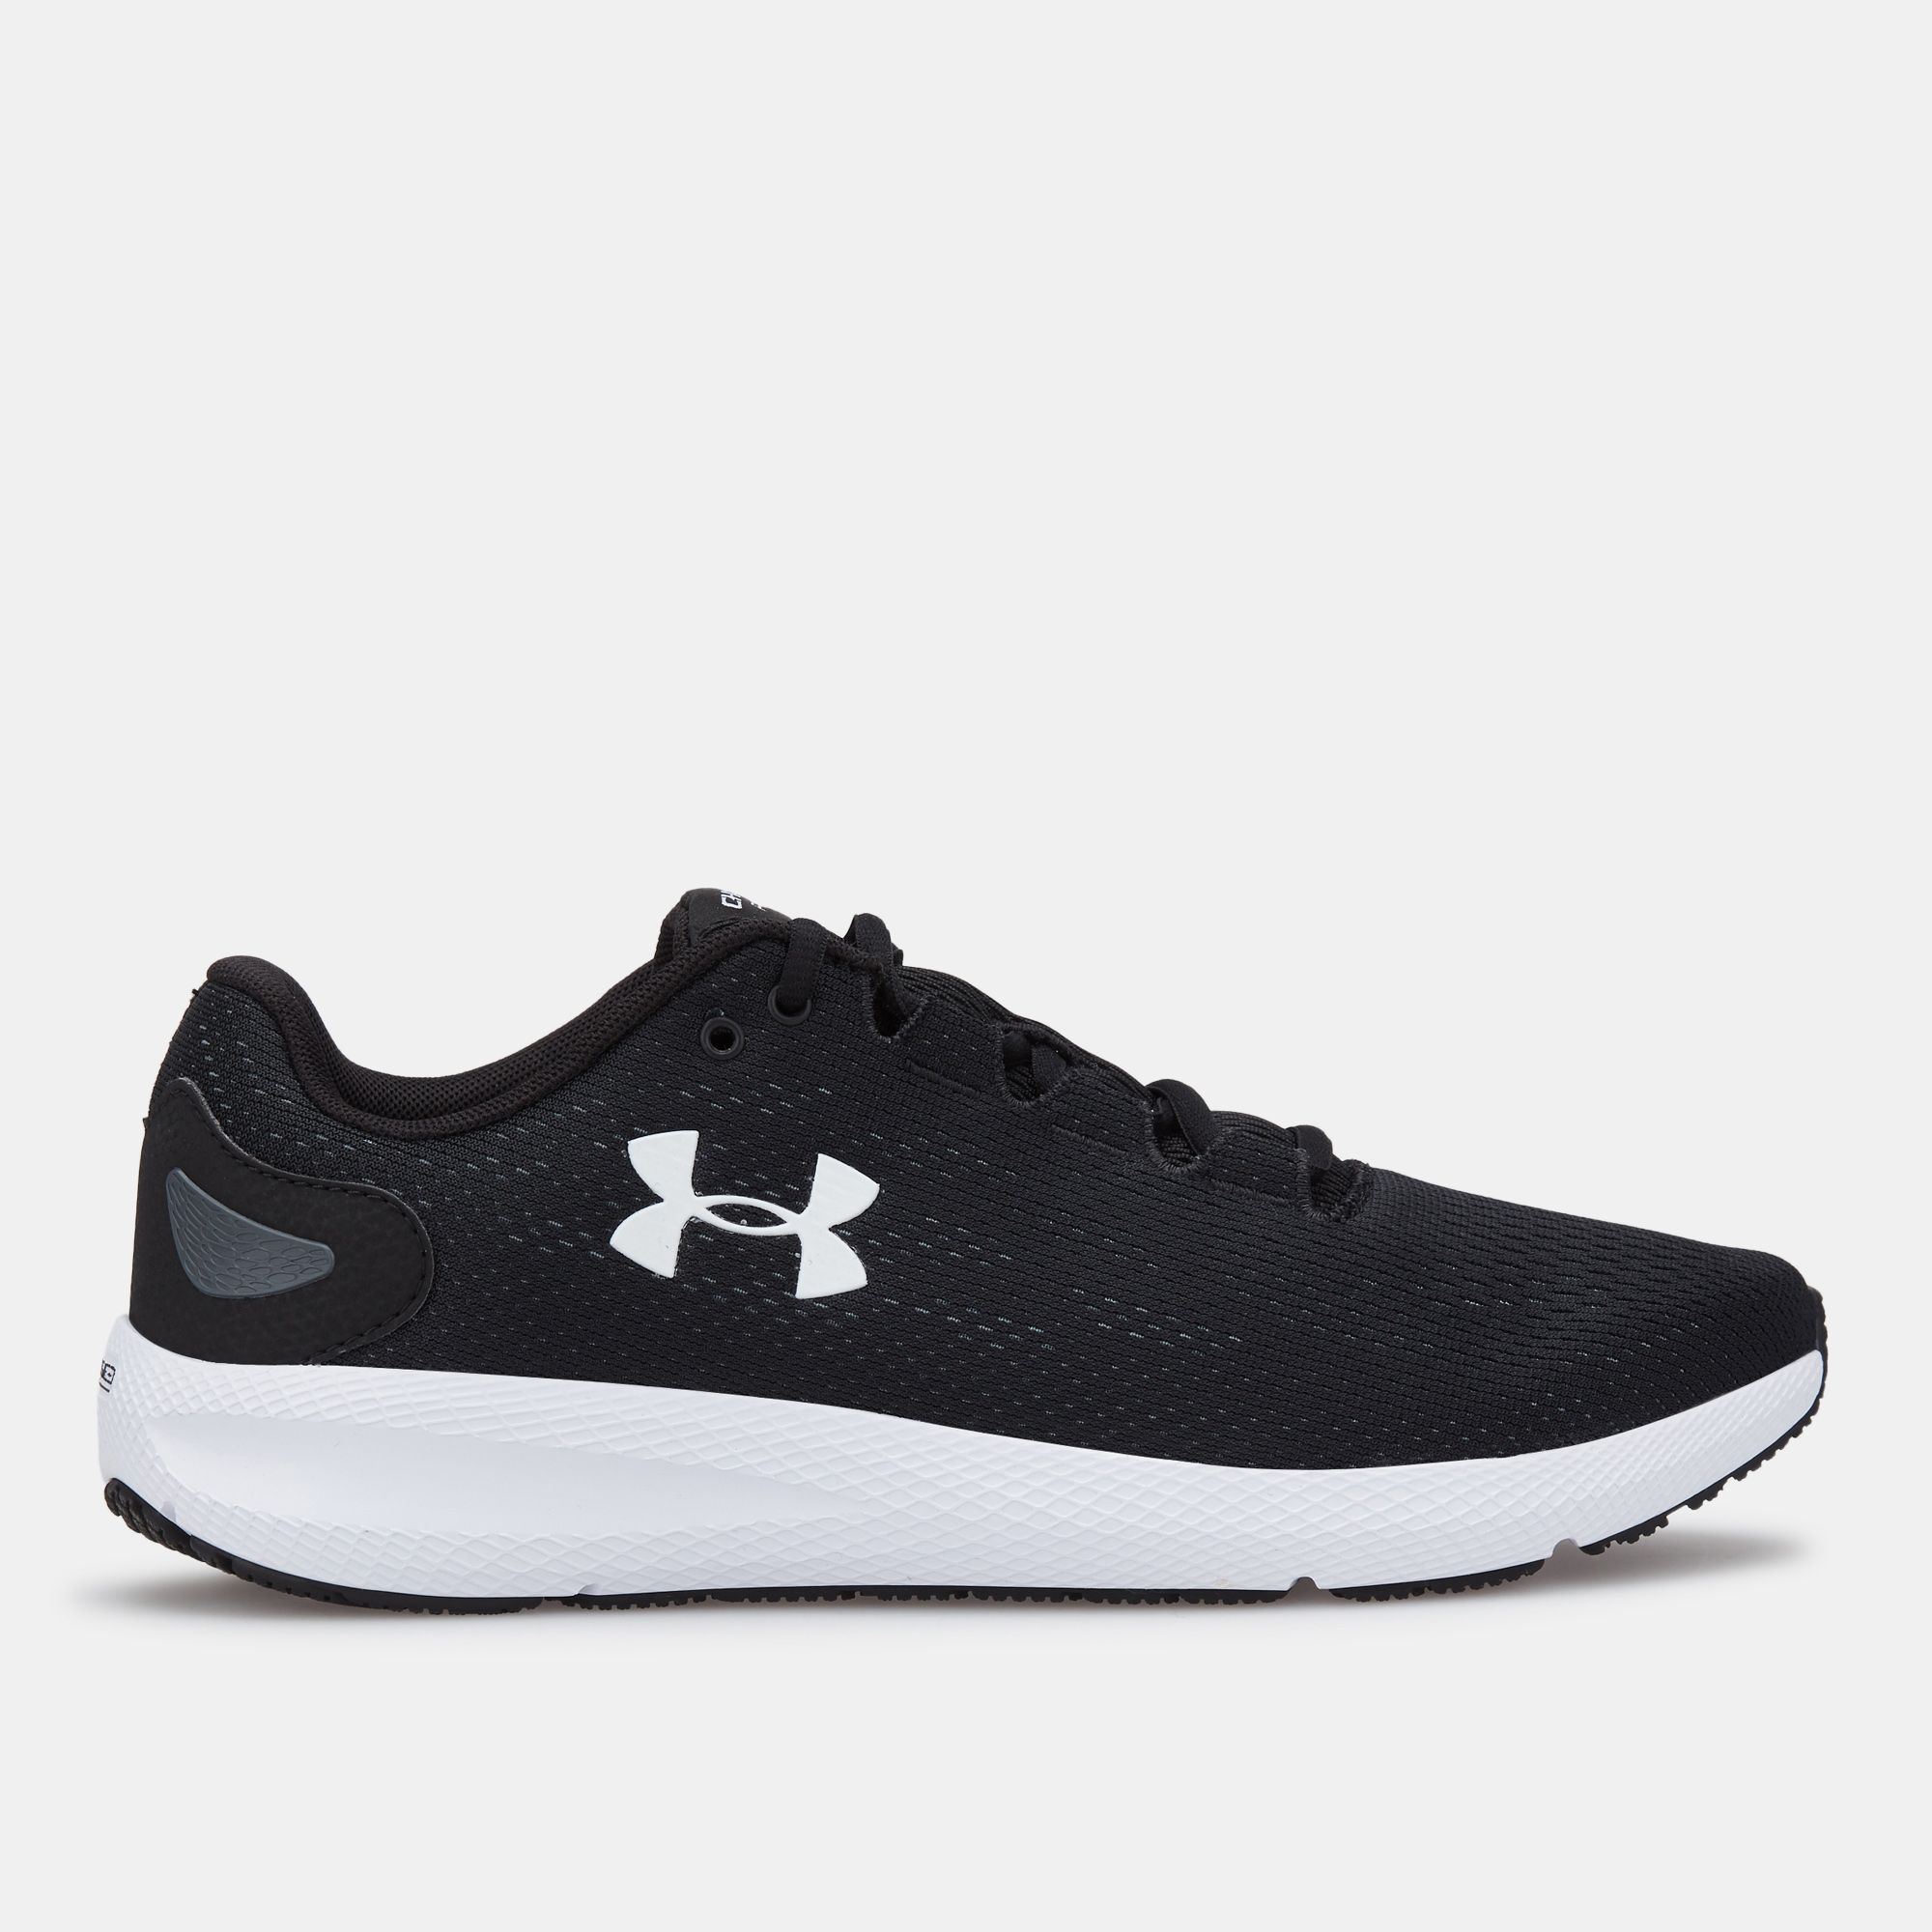 under armour mens charged shoes